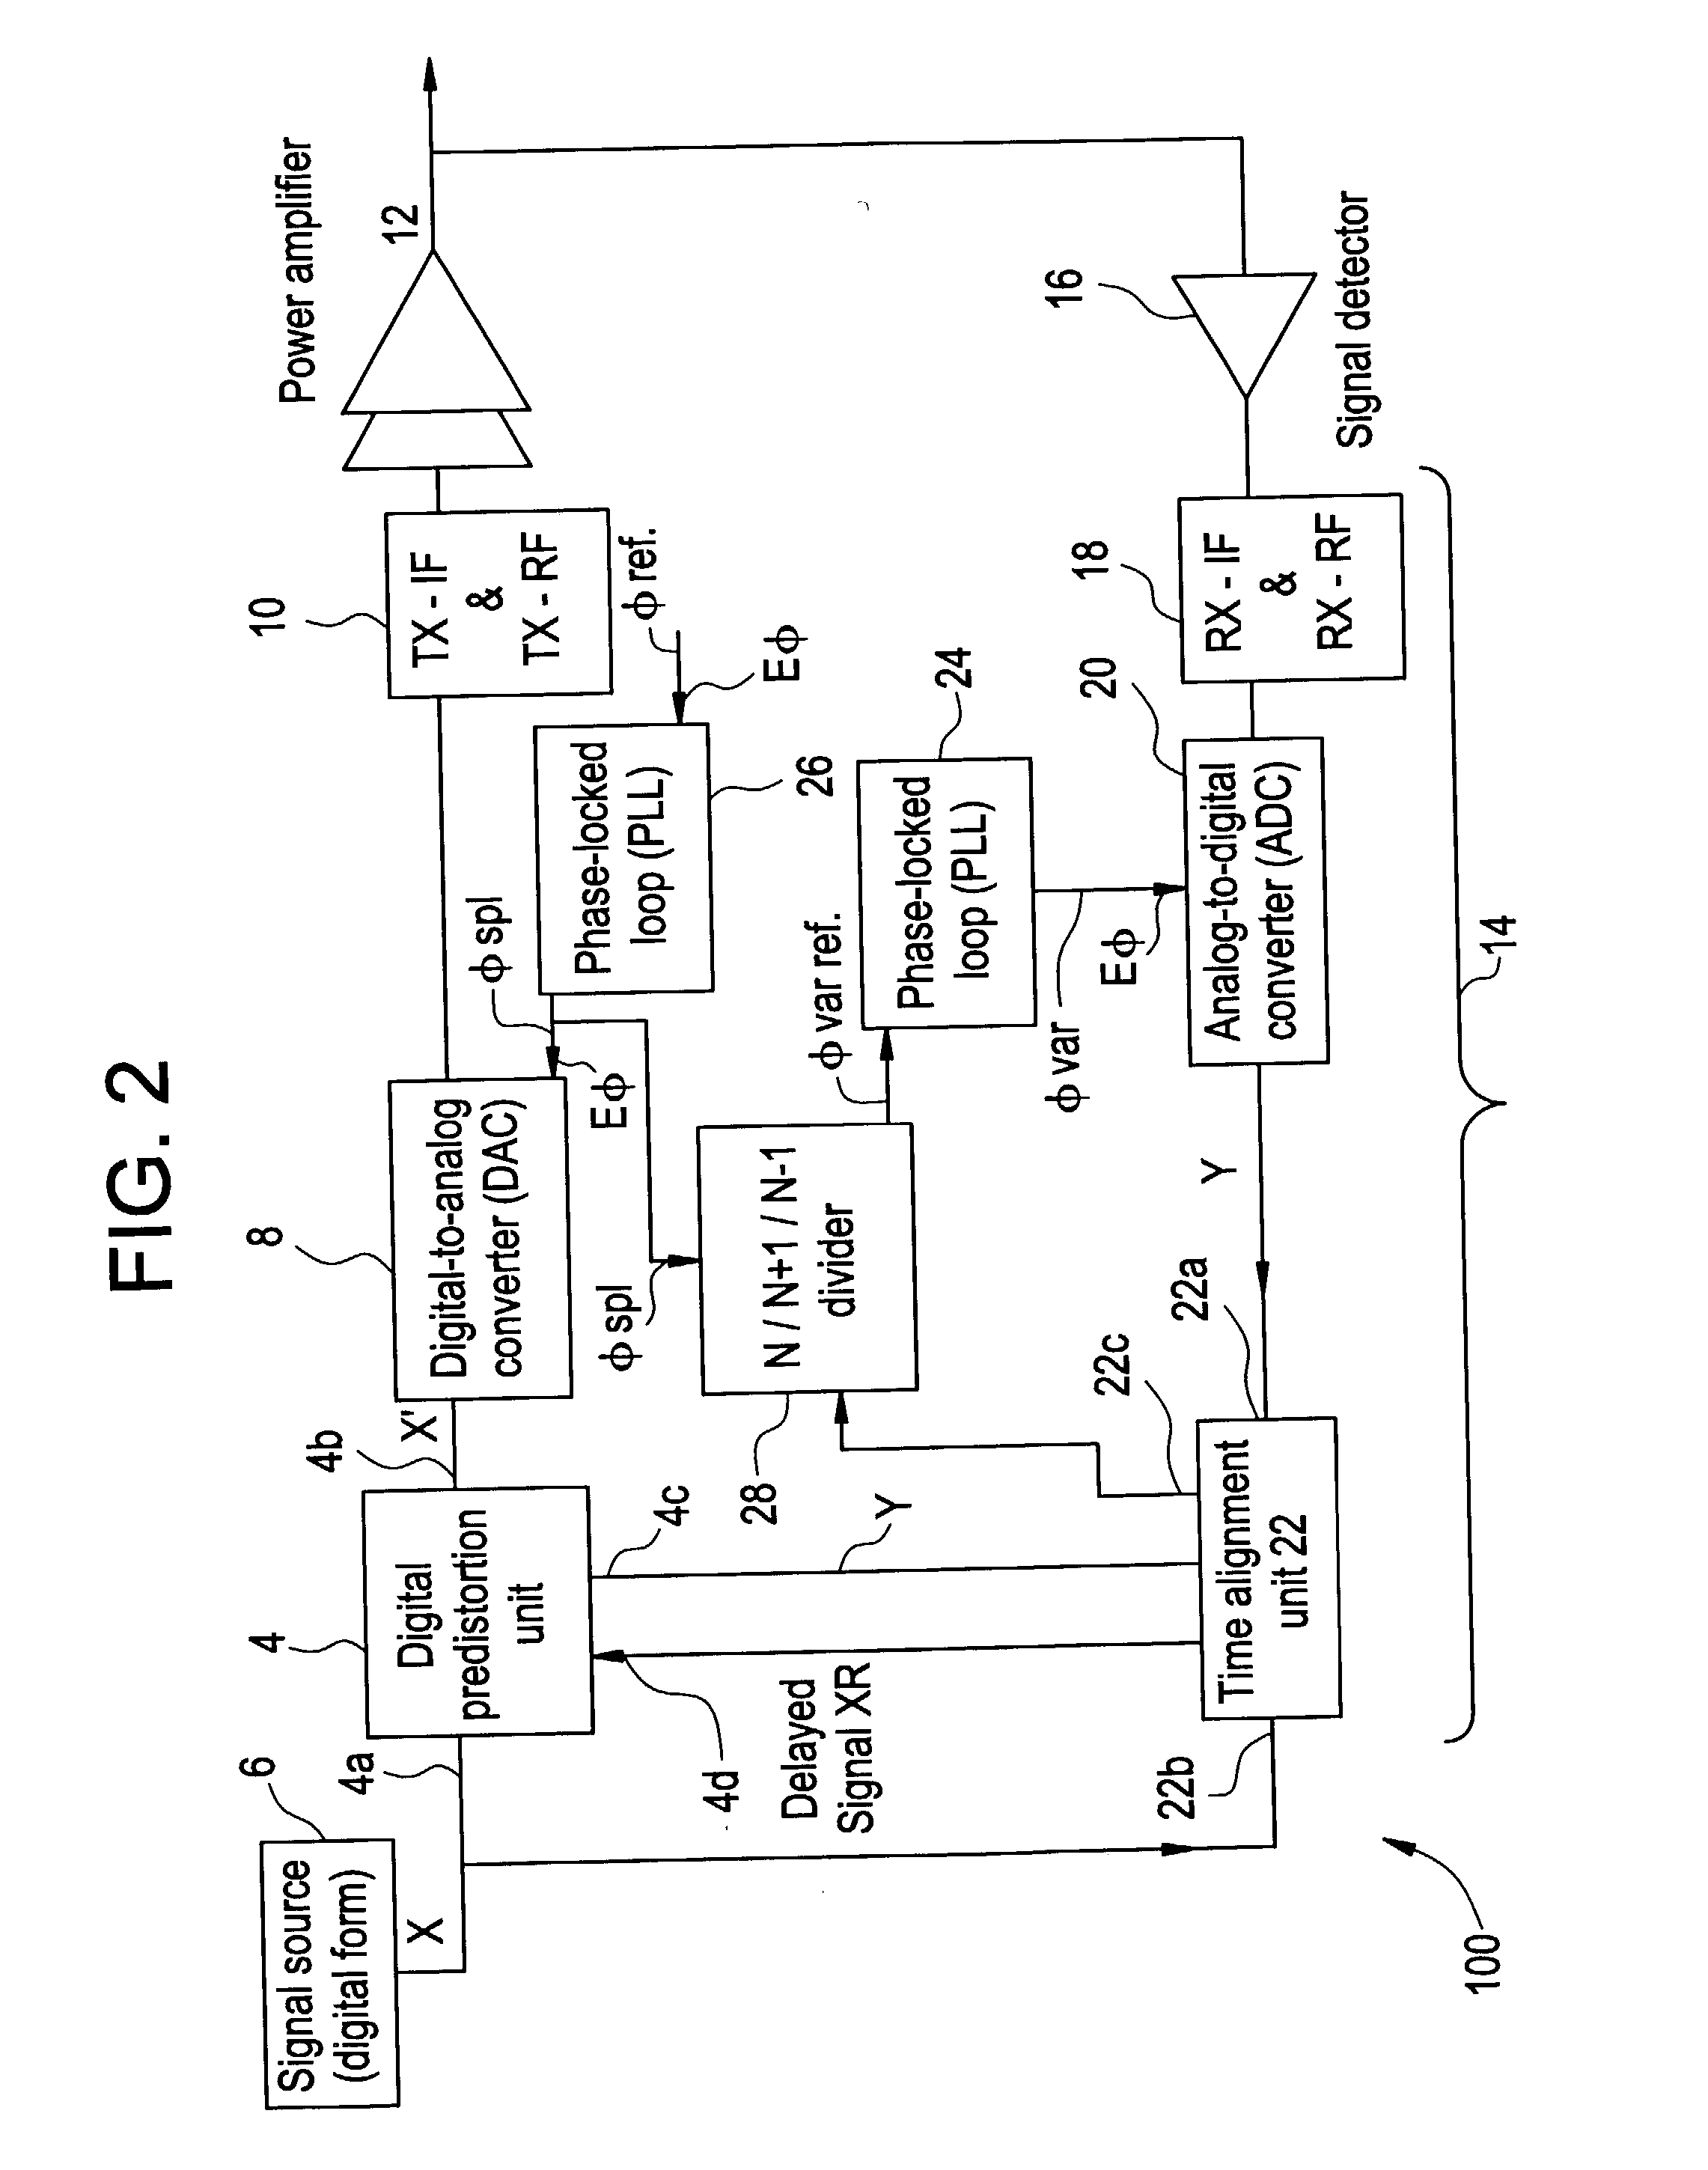 Method and apparatus for preparing signals to be compared to establish predistortion at the input of an amplifier